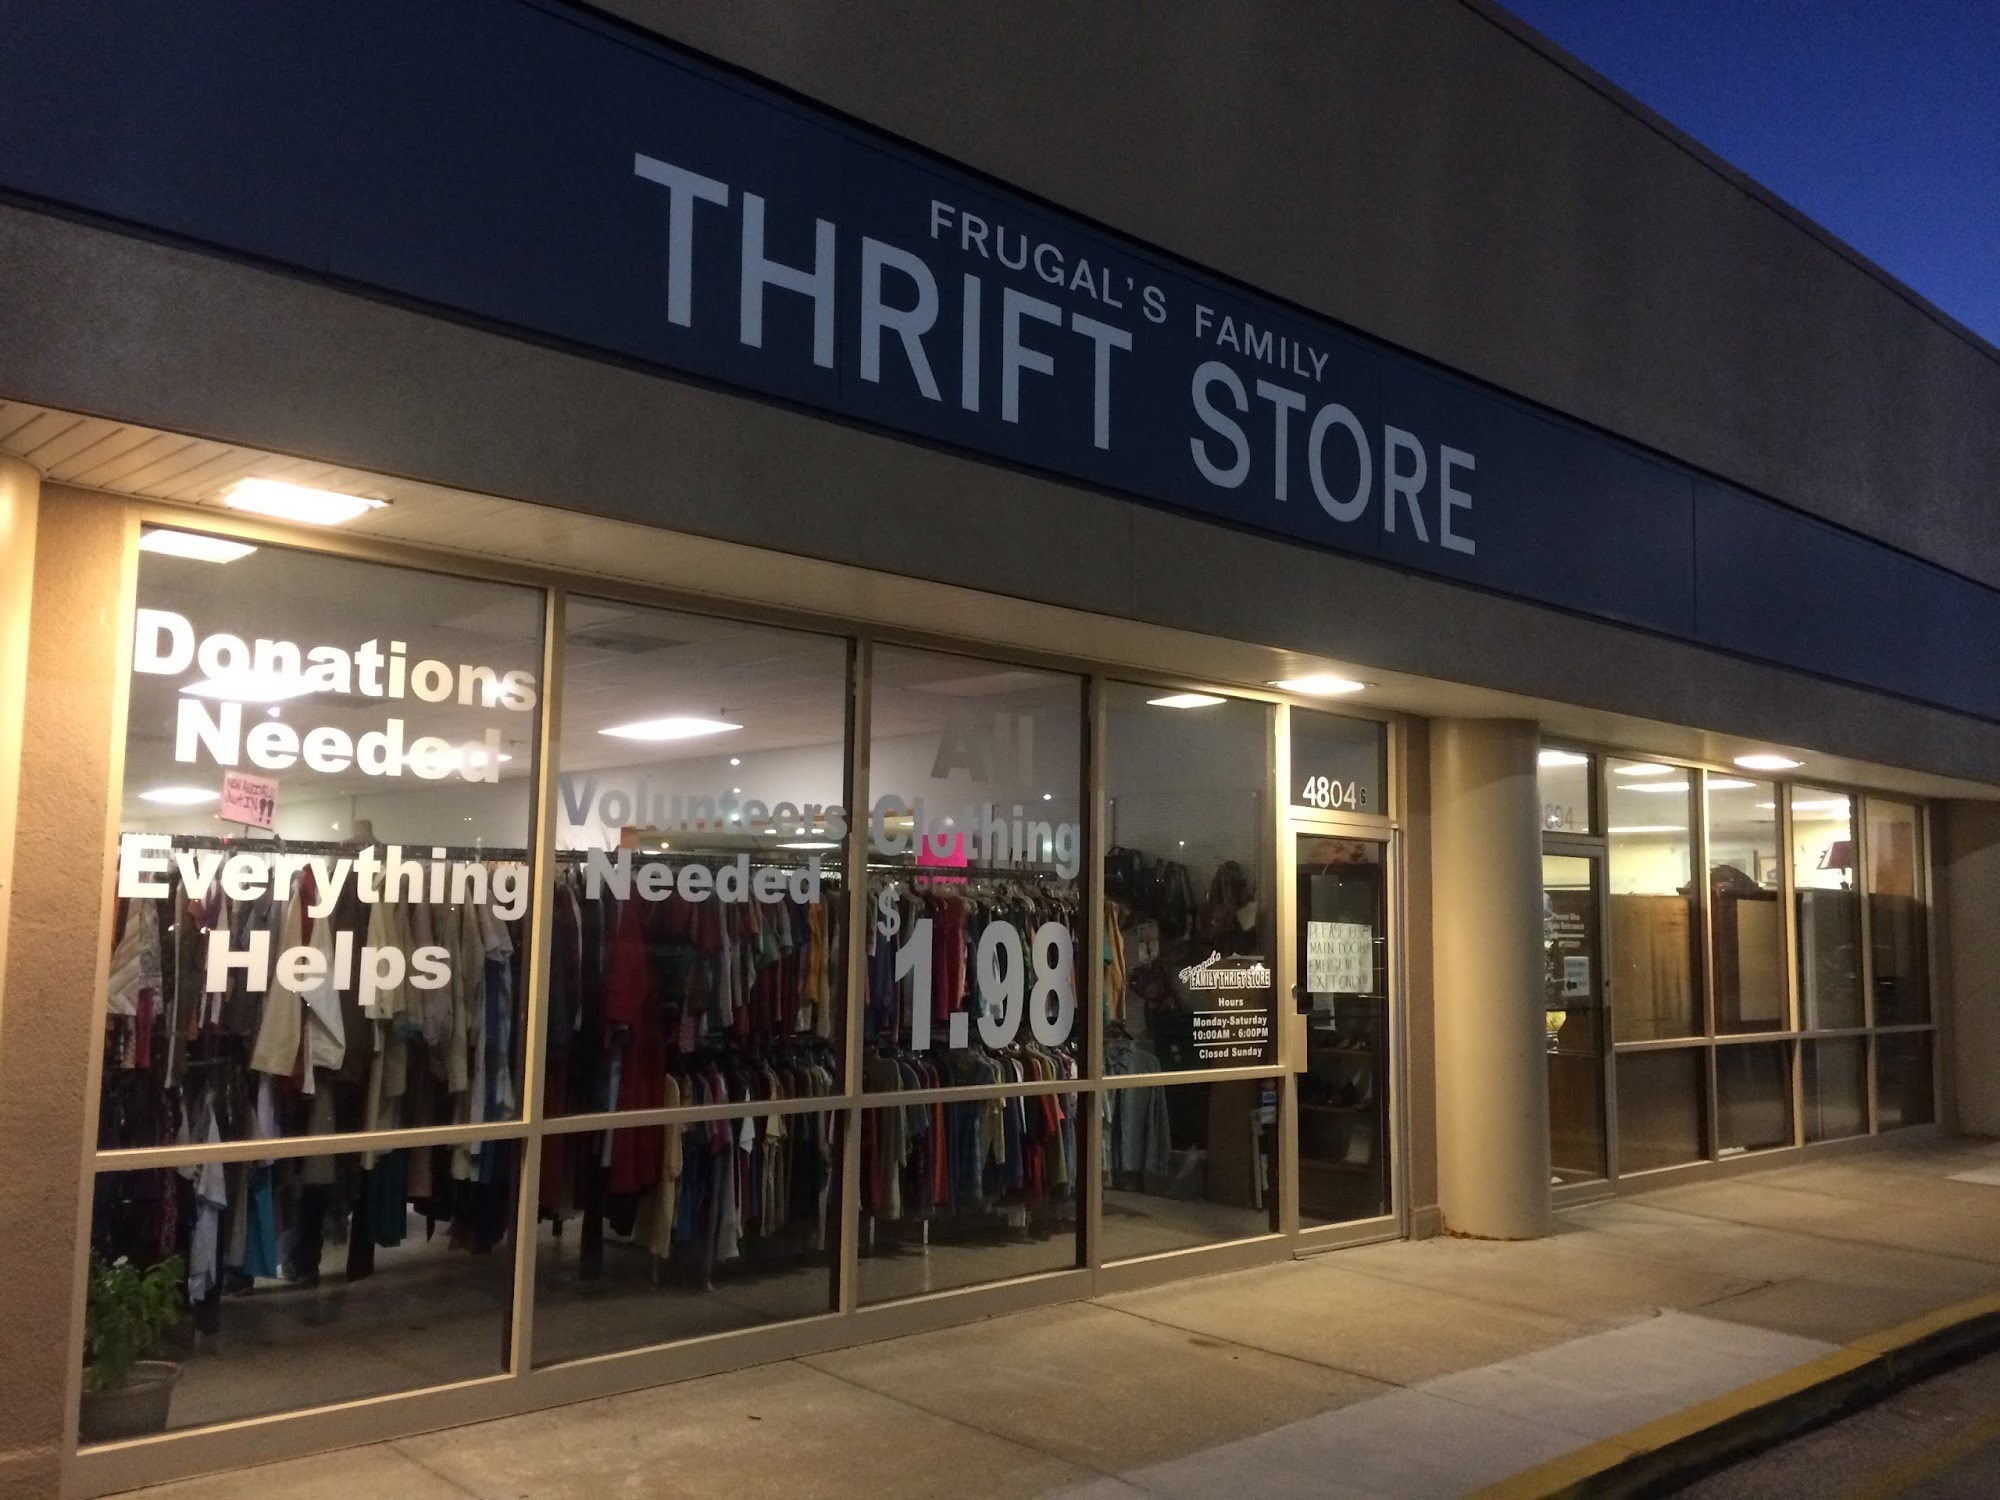 Frugal's Family Thrift Store